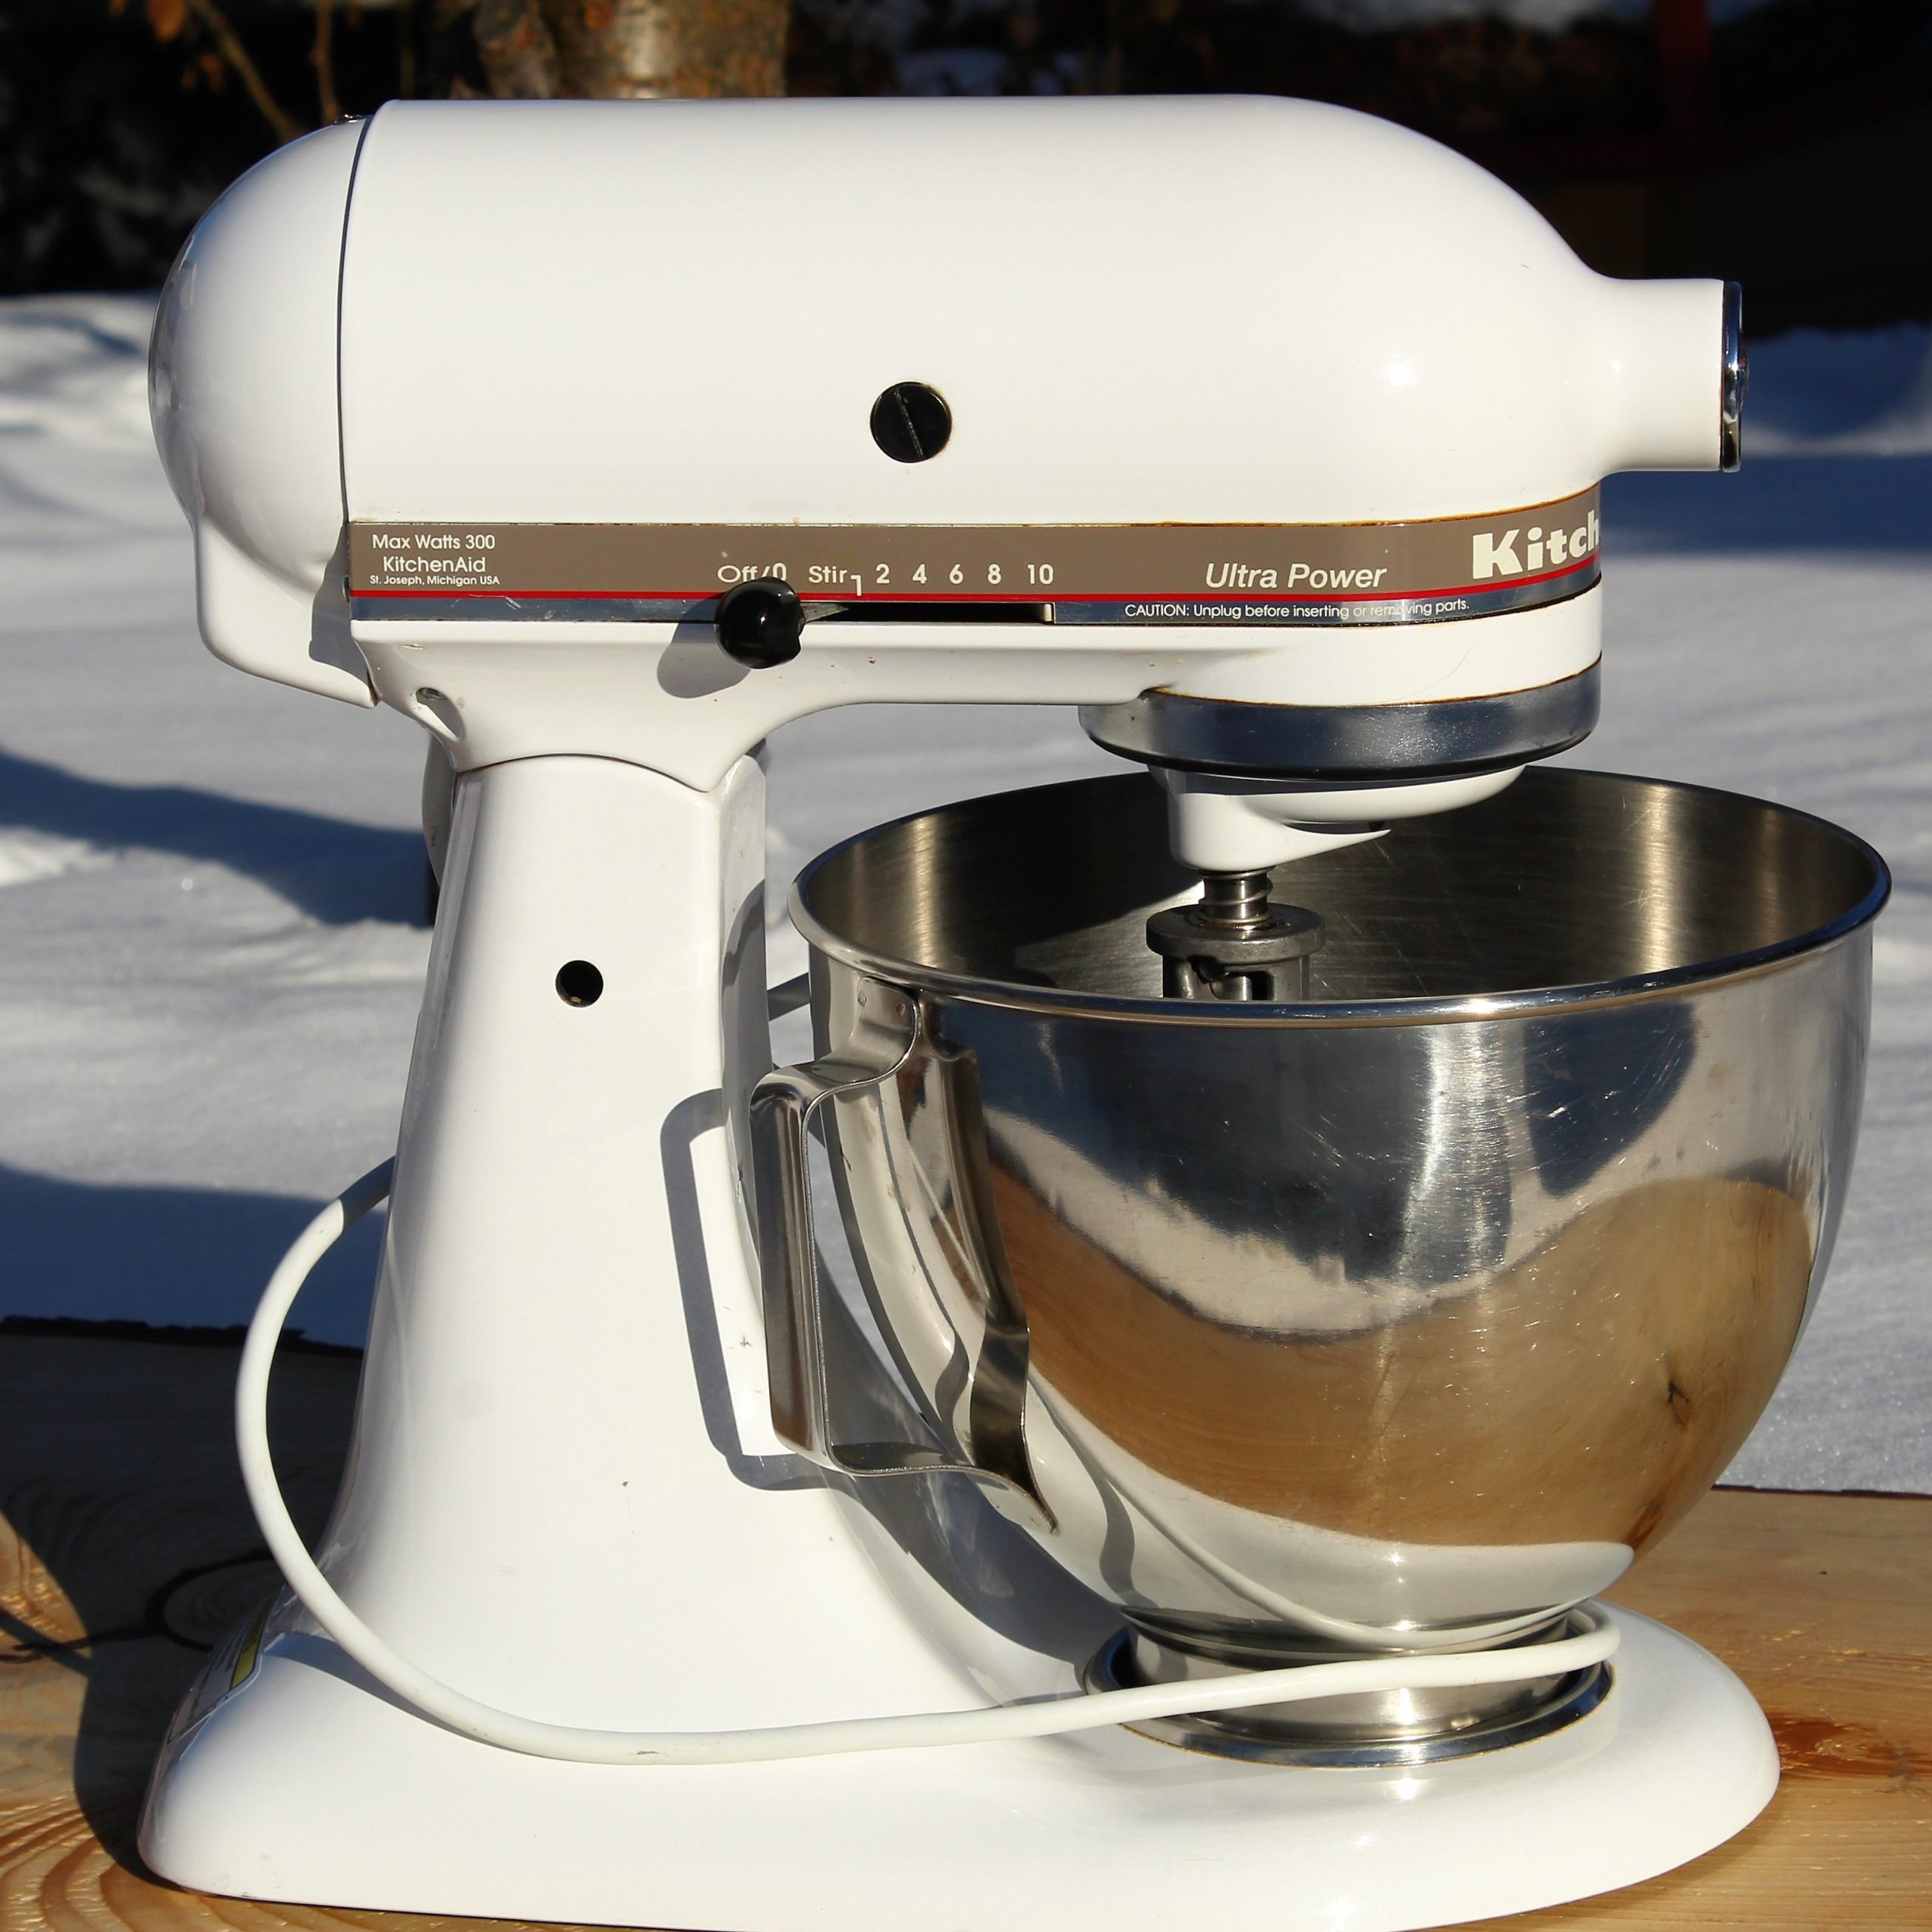 https://cansanity.com/wp-content/uploads/Ultra-Power-KitchenAid-Stand-Mixer-2-2-scaled.jpg